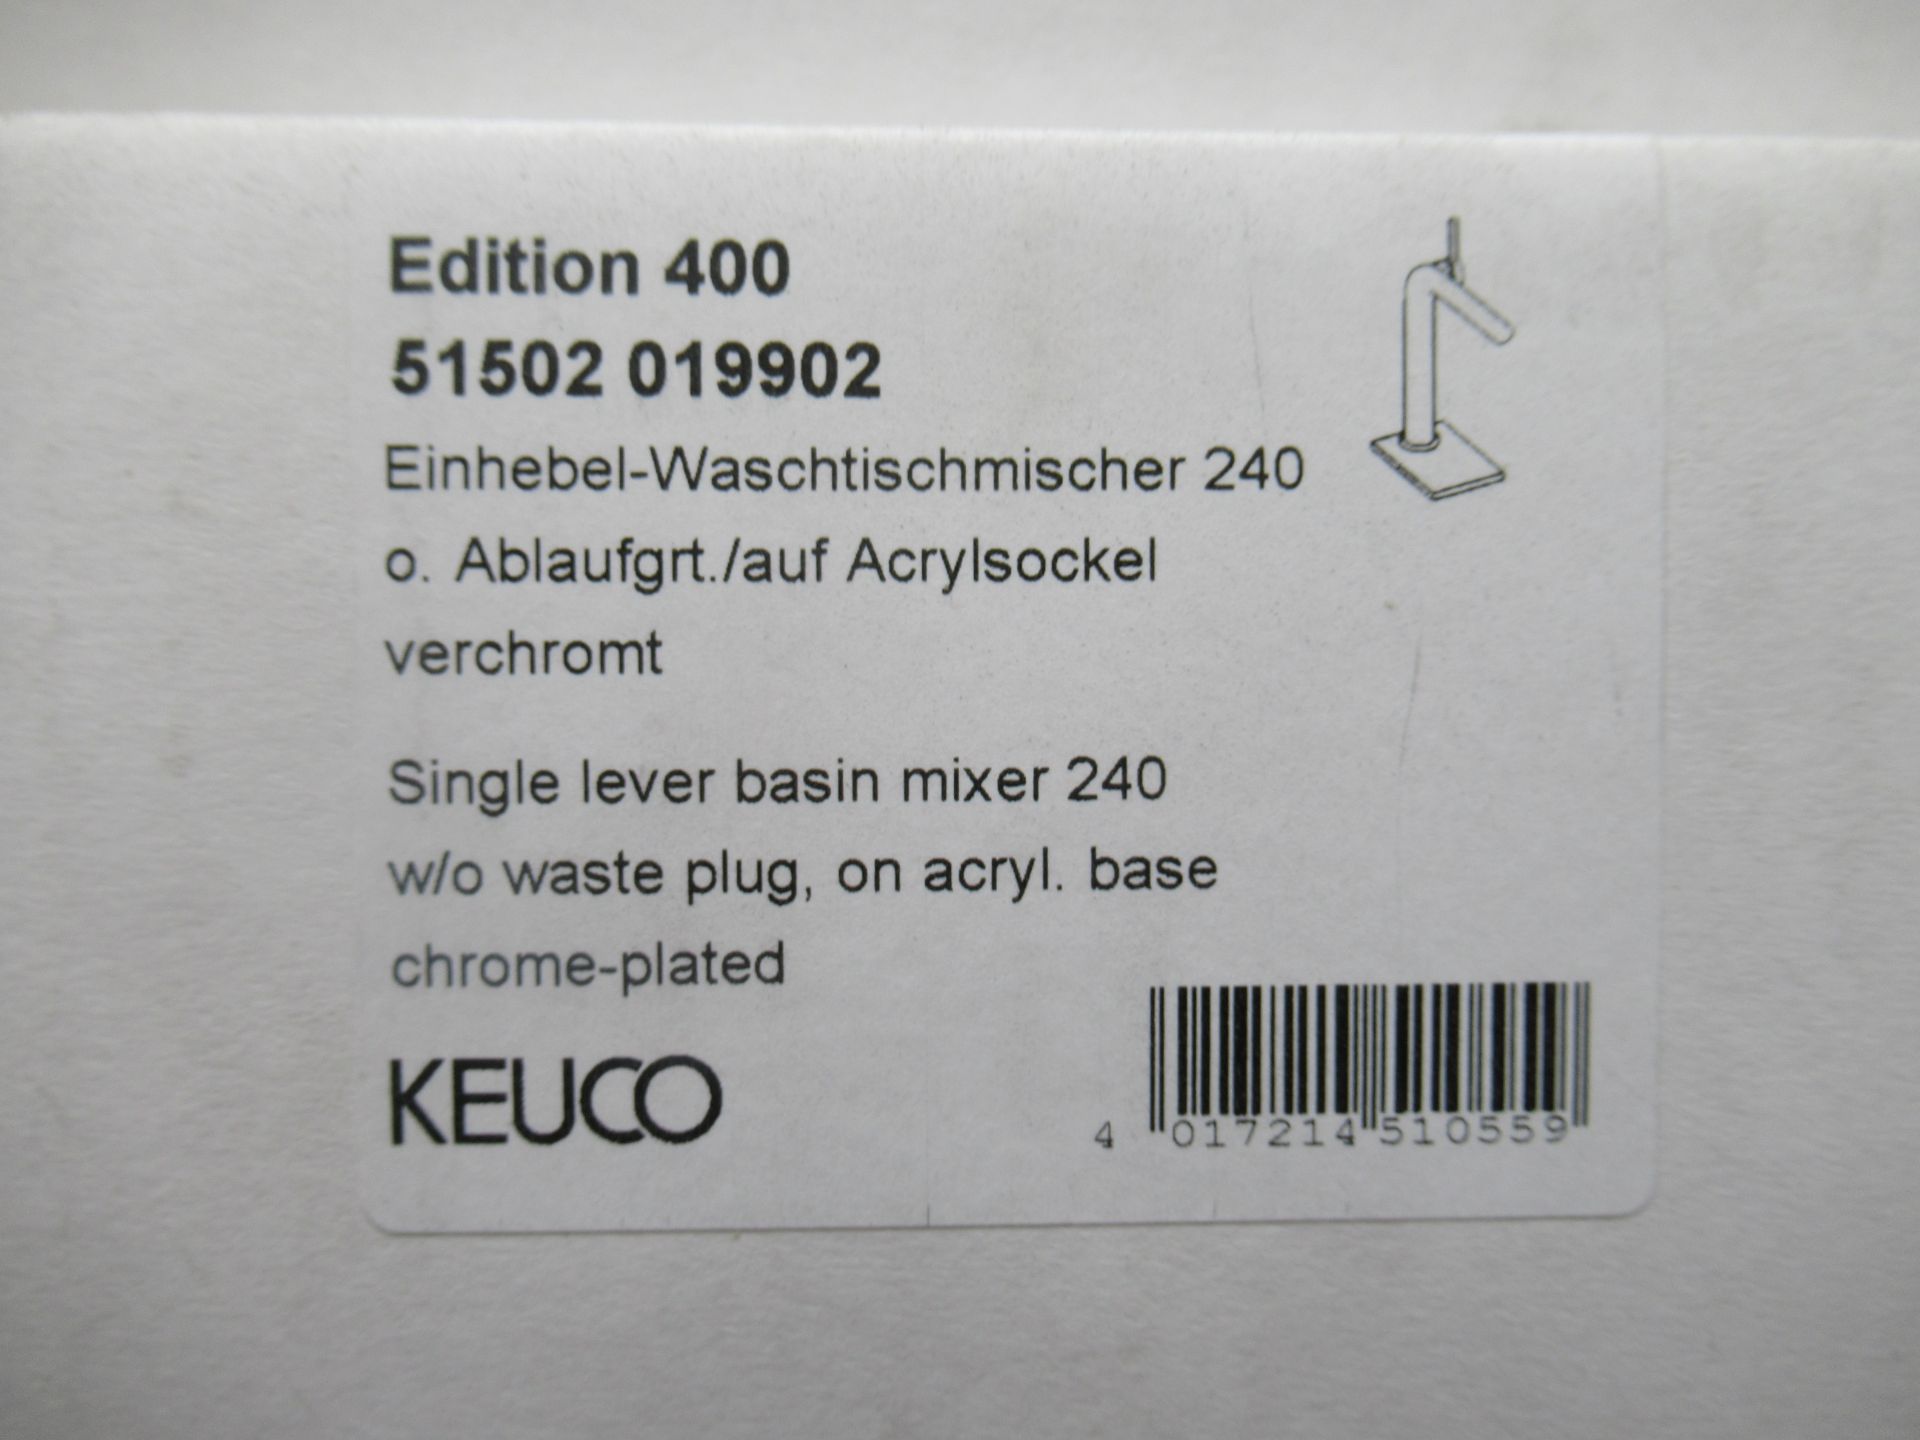 2 x Keuco Edition 400 Single Lever Basin Mixer 240-Tap, Chrome Plated, P/N 51502-019902 - Image 2 of 3